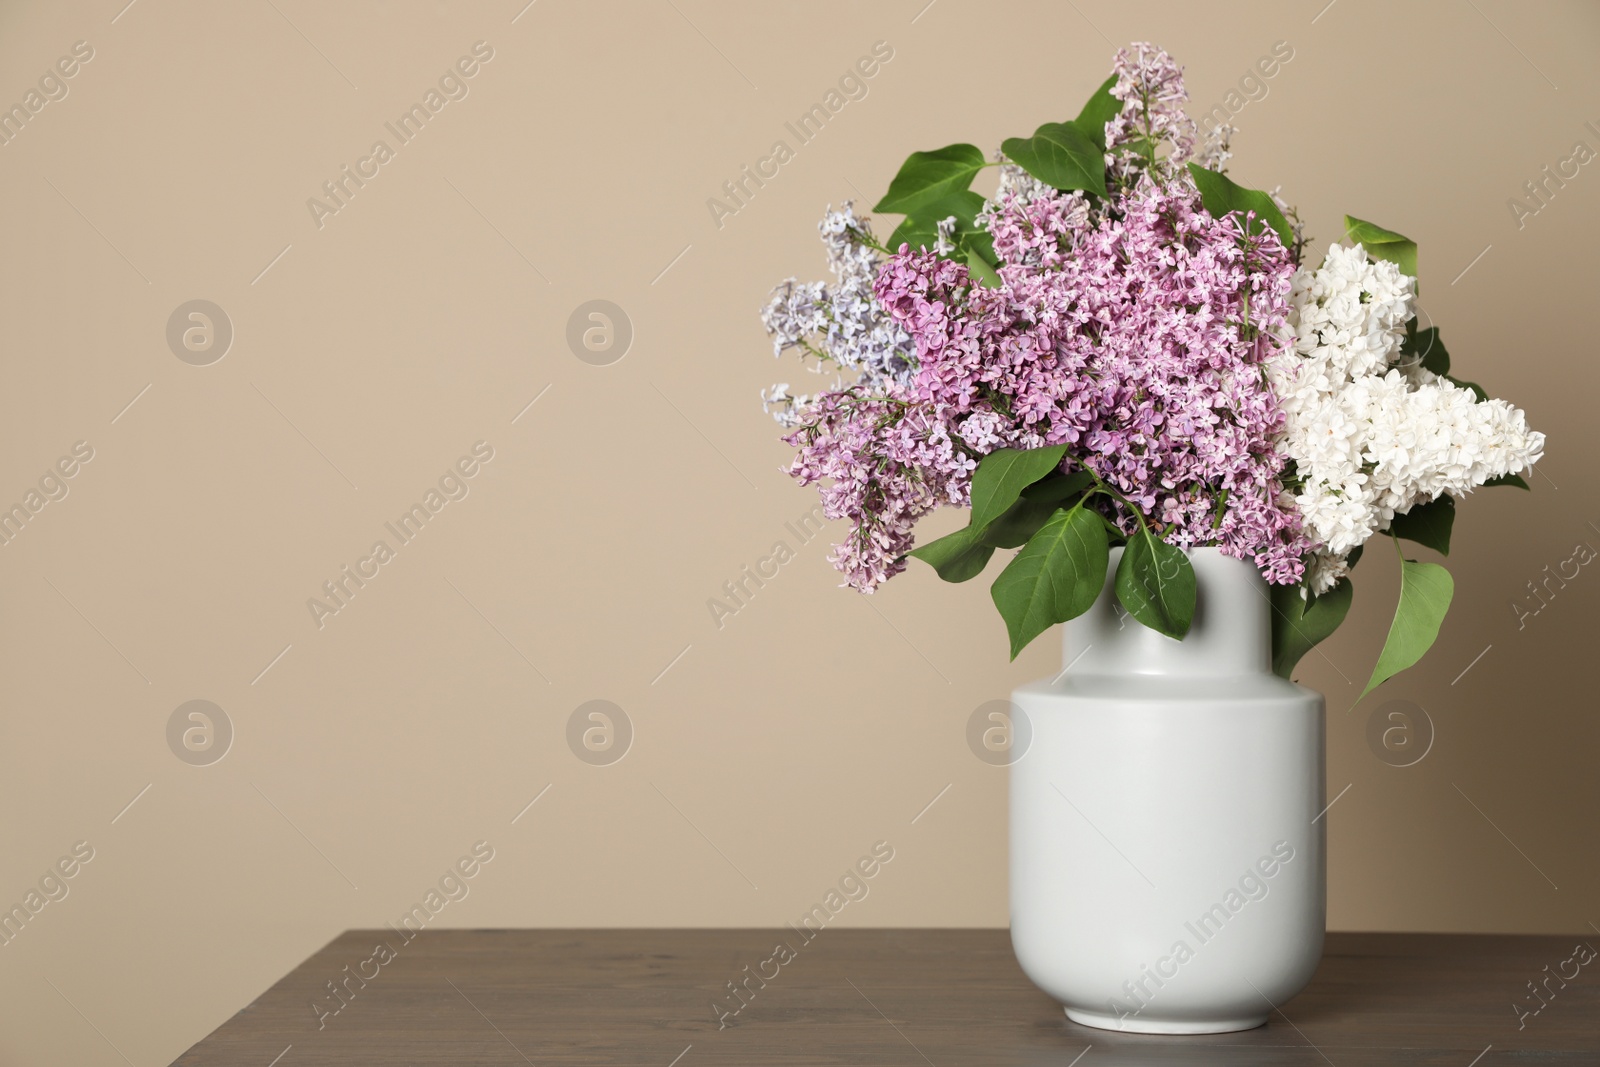 Photo of Beautiful lilac flowers in vase on wooden table against beige background. Space for text